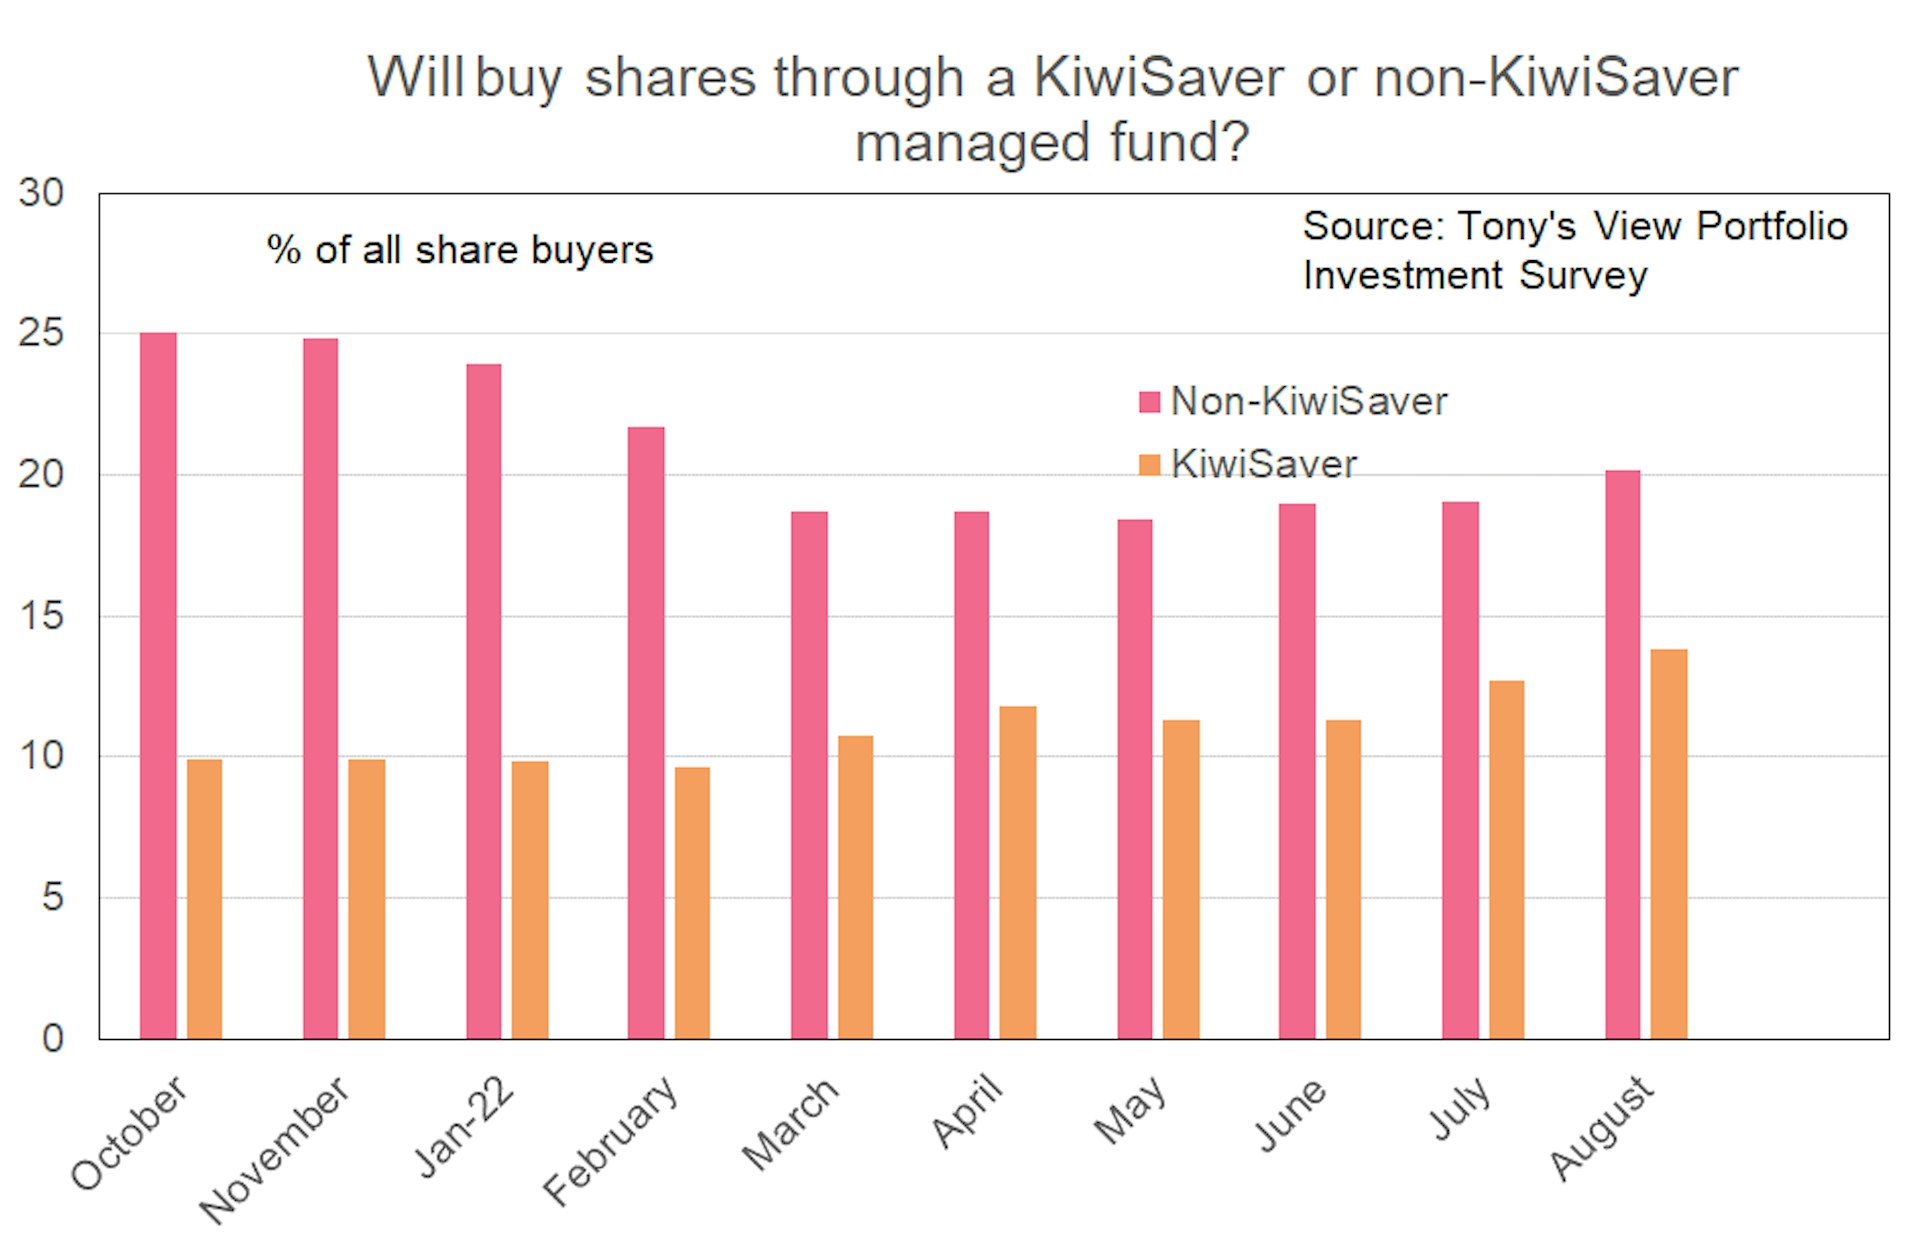 Bar graph showing intention to buy shares through a KiwiSaver managed fund compared to a non-KiwiSaver fund. Preference toward non-KiwiSaver funds has grown to 20%, and preference toward KiwiSaver funds has grown to 14%. 